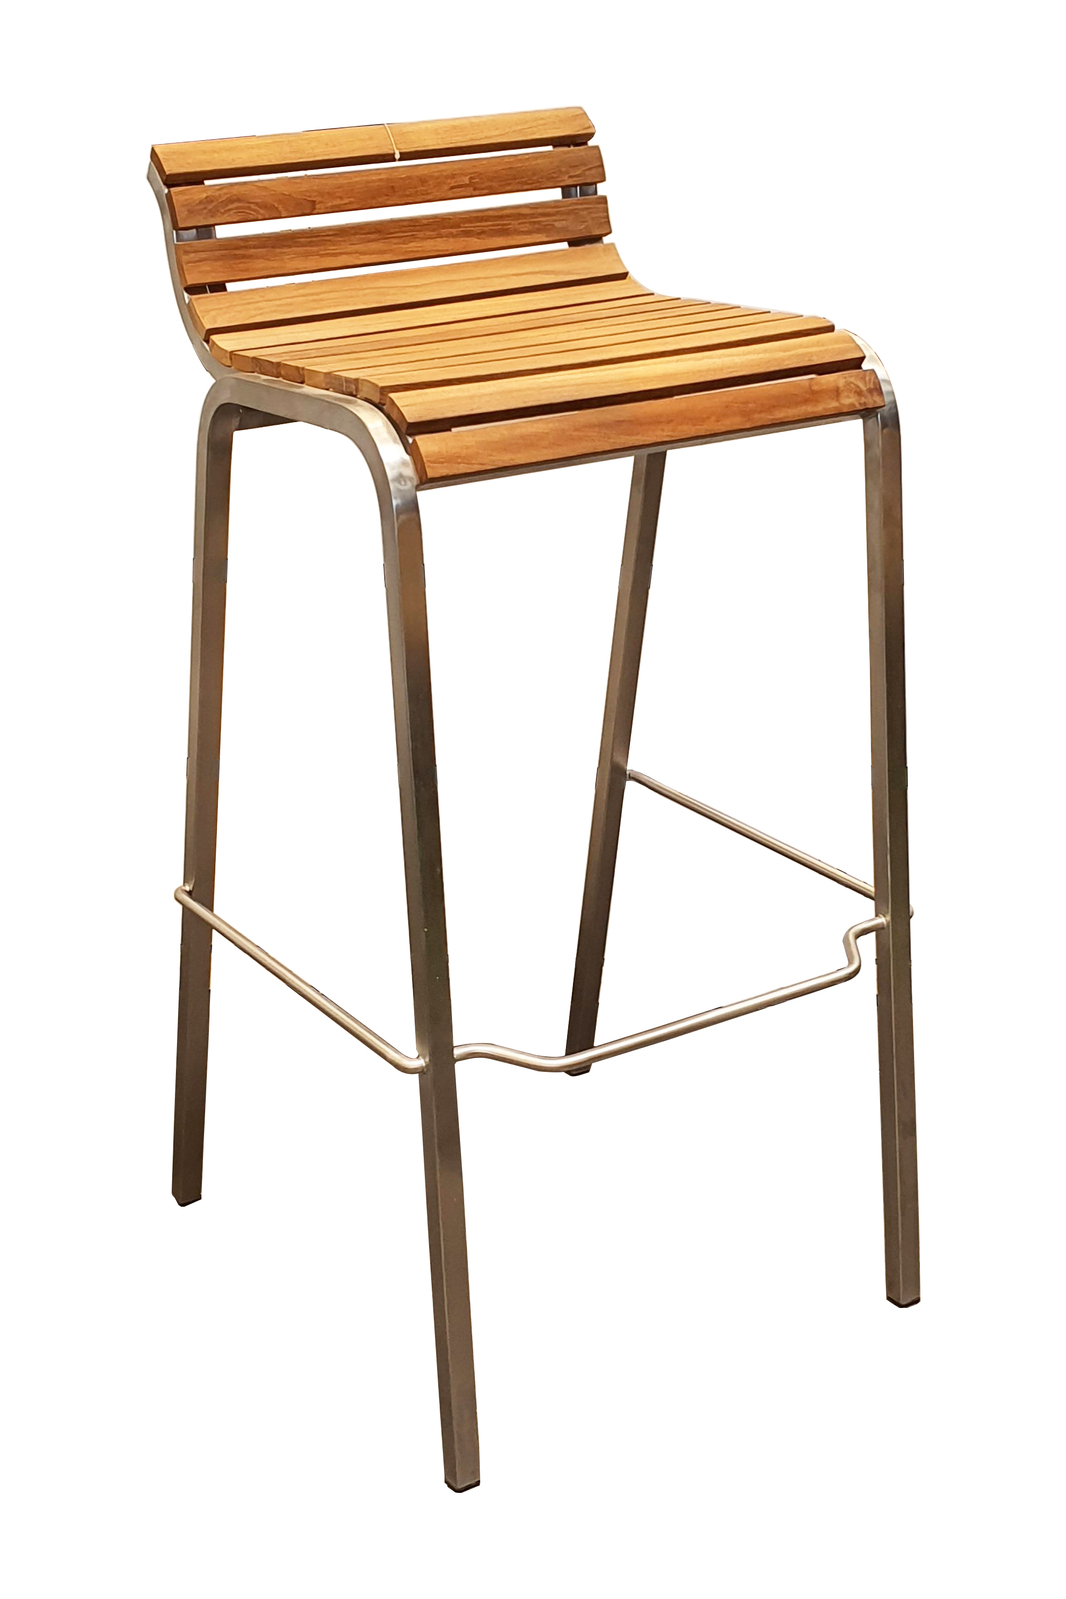 East Stainless Steel Outdoor Bar Stool with Timber Seat 770mm